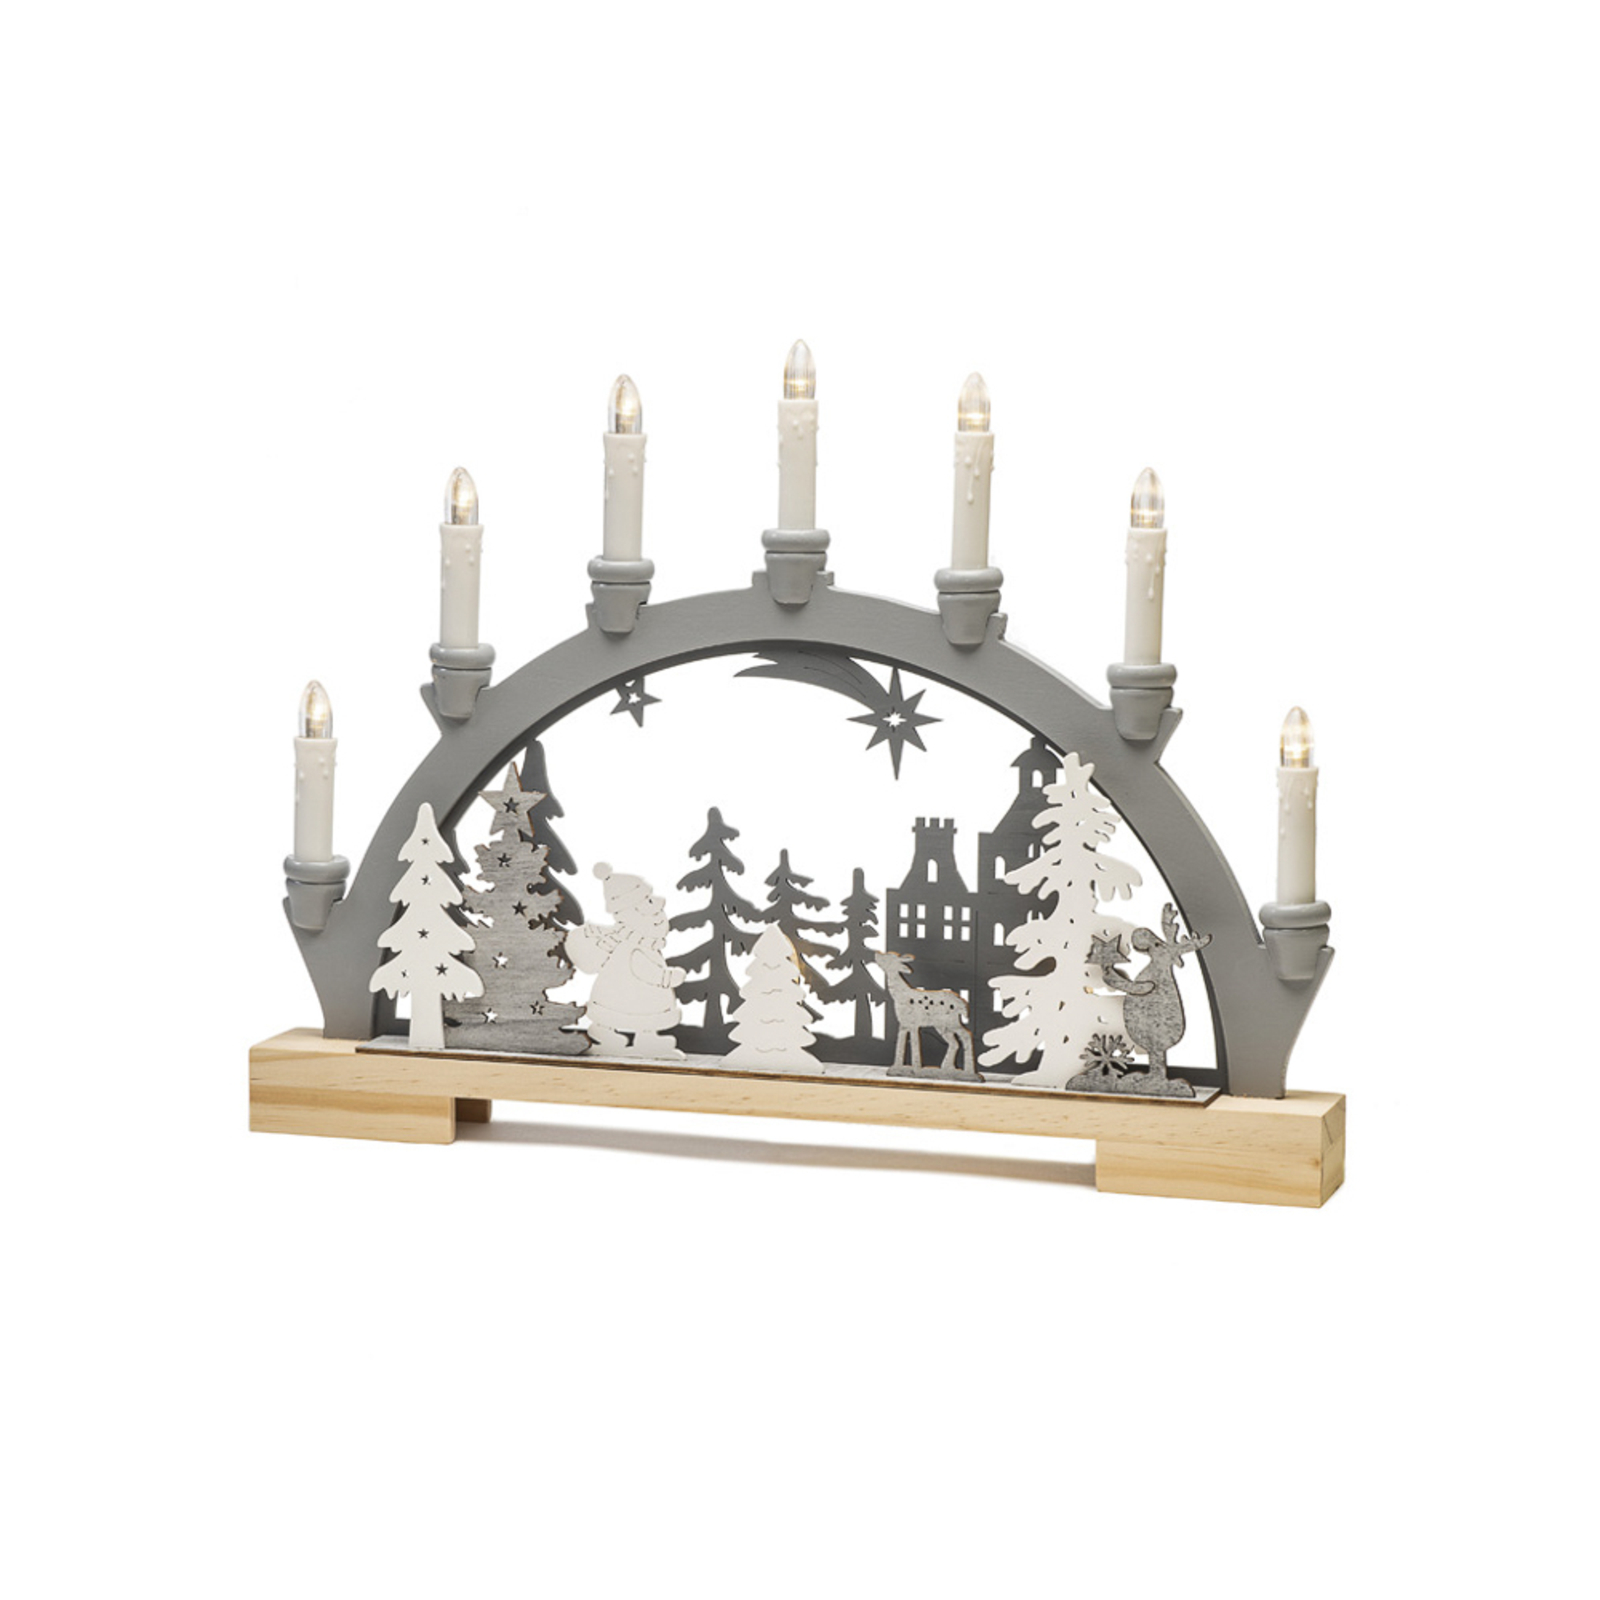 Hikers in the Woods with Animals LED candle arch